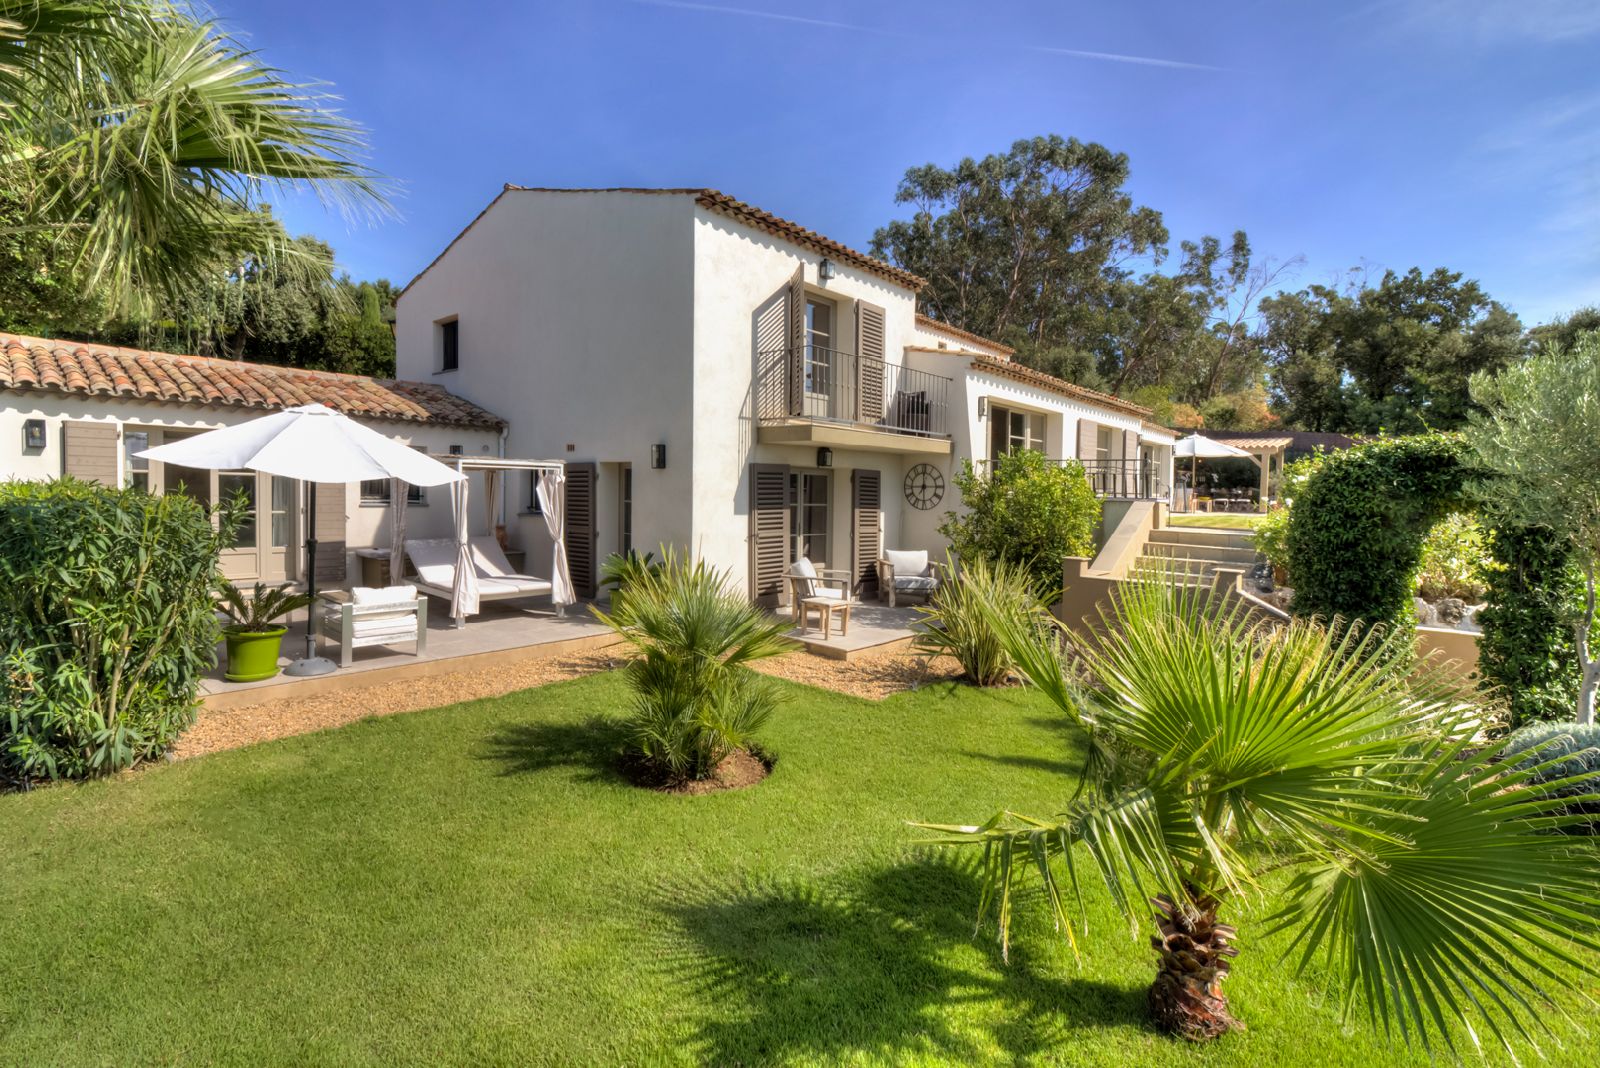 Exterior of property with garden and trees at Villa Zamora on the Cote d'Azur